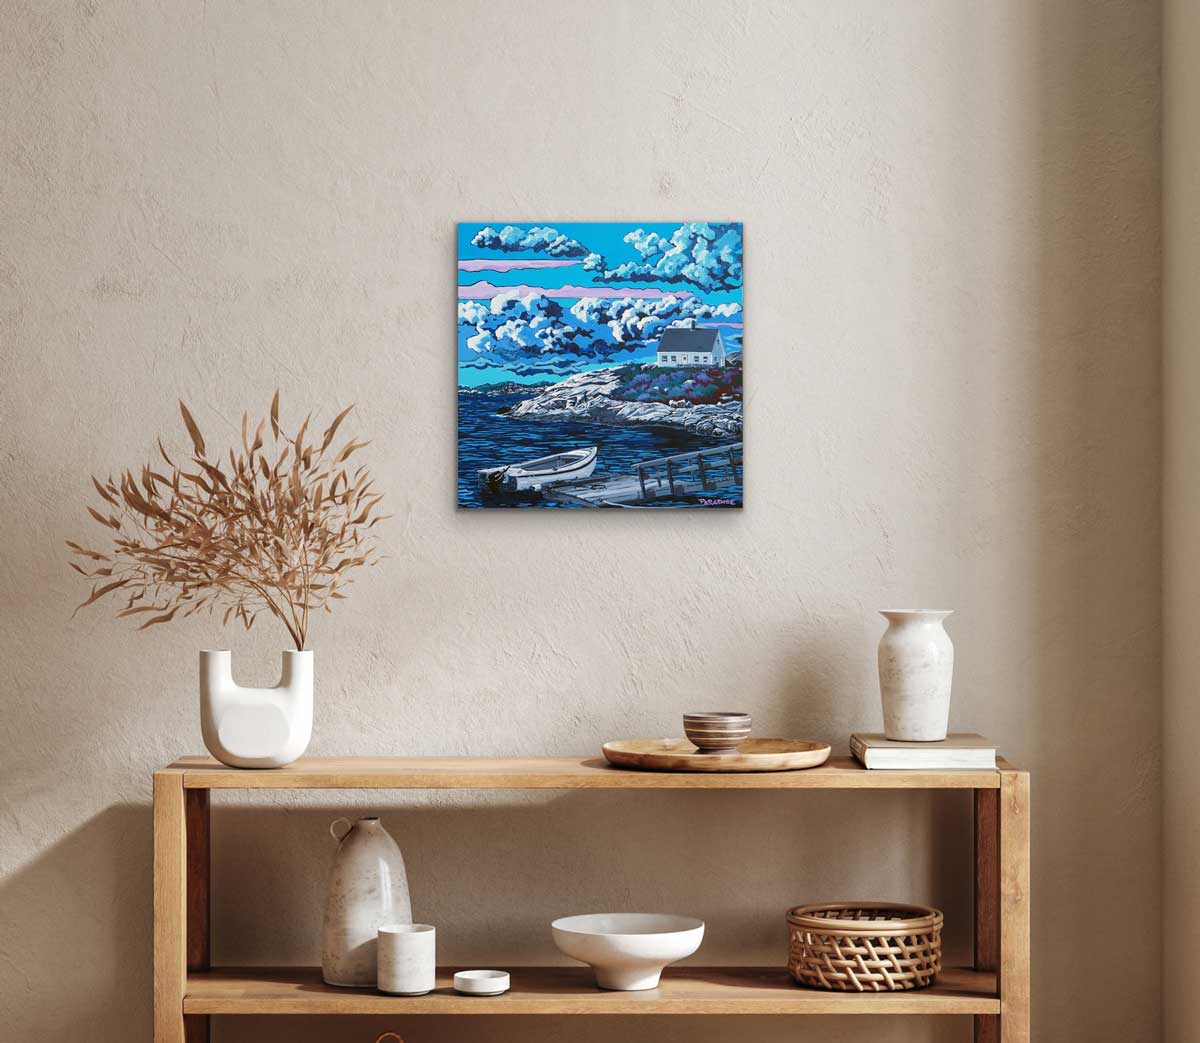 Peggy's Cove cozy peaceful country house with with small boat. Original painting by a professional Canadian landscape artist. visual art ready to hang on your wall.